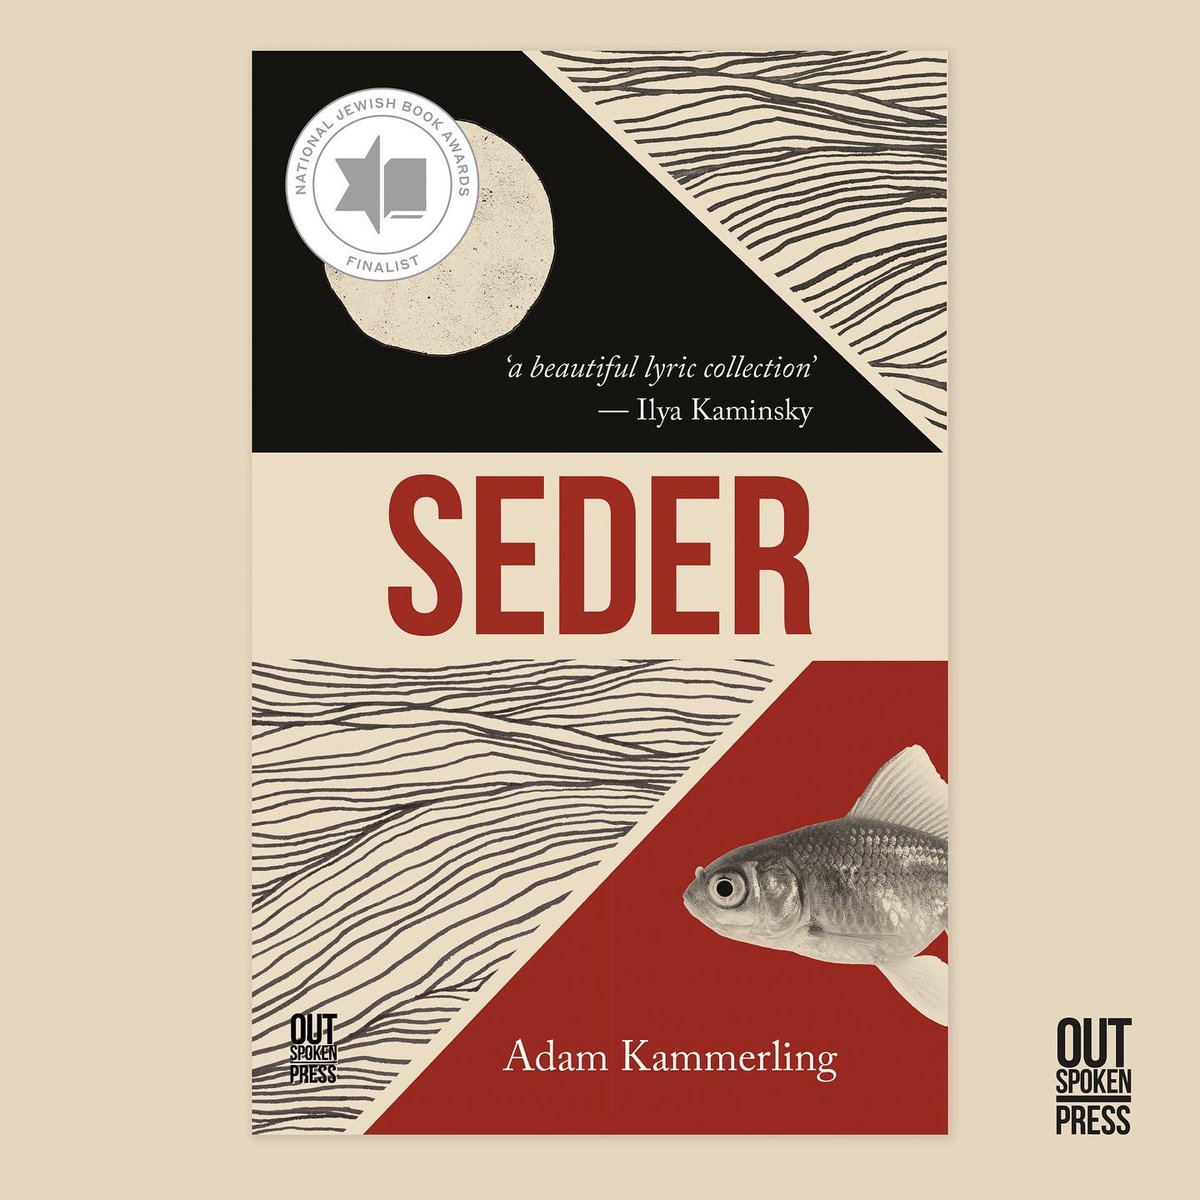 Goldfish folds in half disappears text into spine their body is one long successful escape —from @adamkammerling’s National Jewish Book Award @JewishBook finalist, SEDER